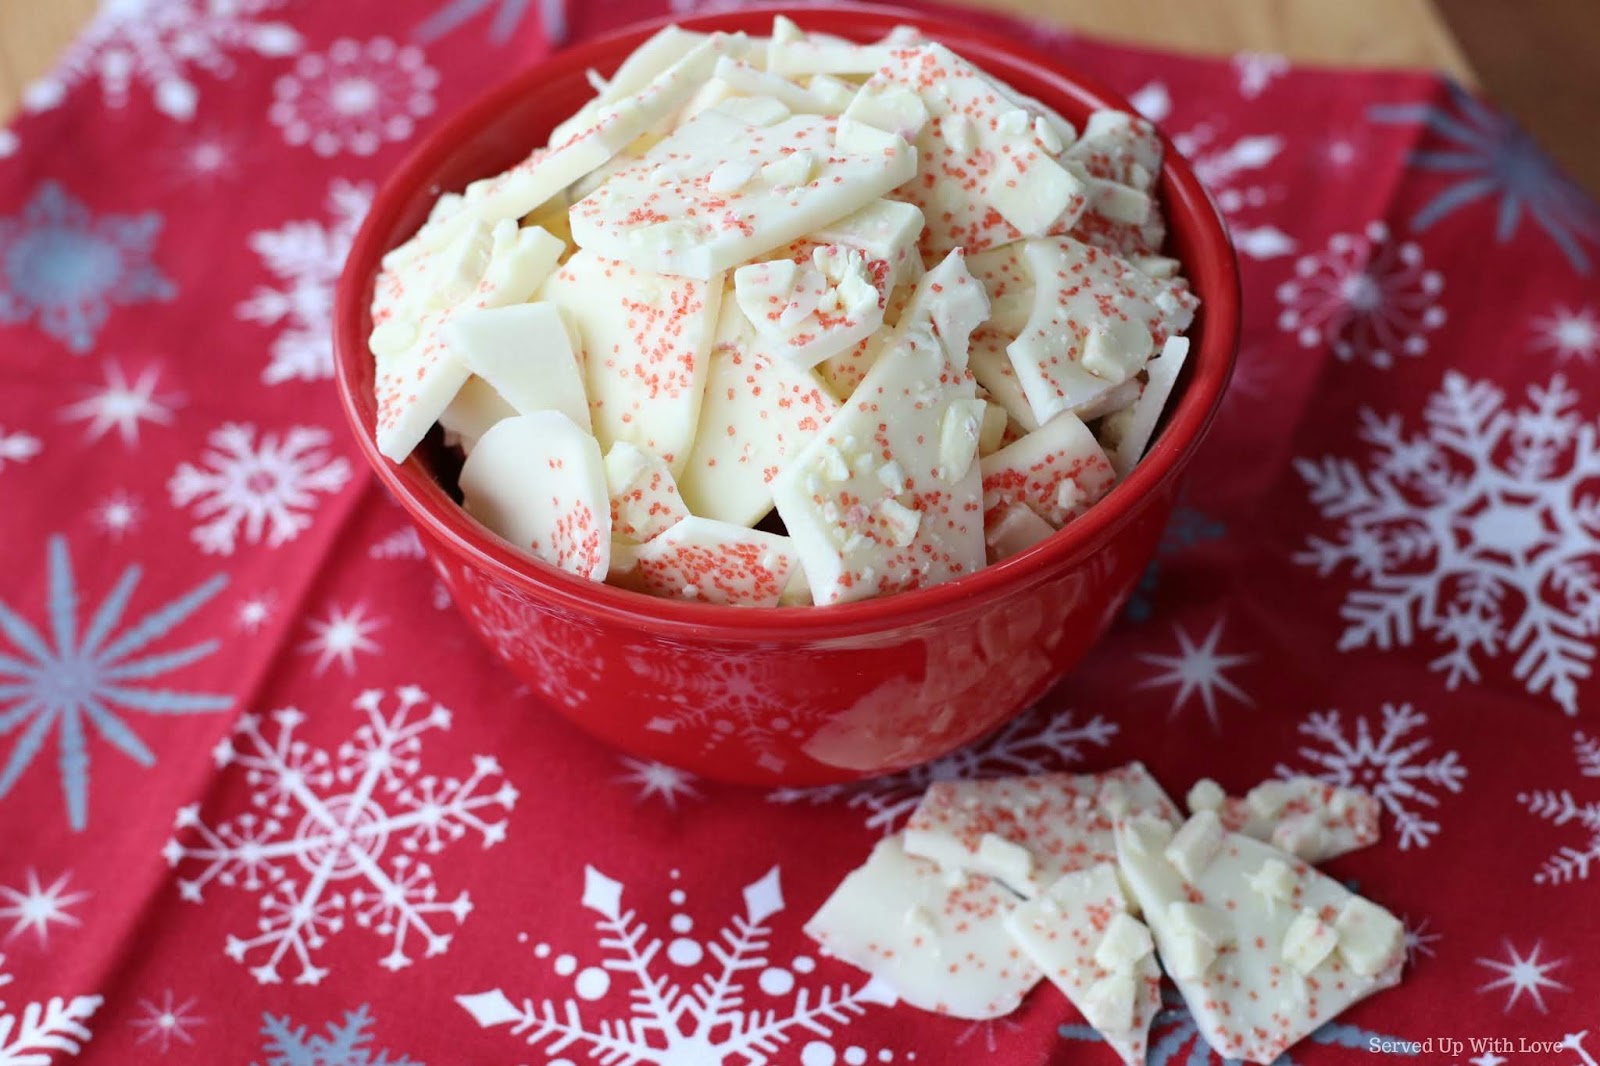 Served Up With Love: Peppermint Bark